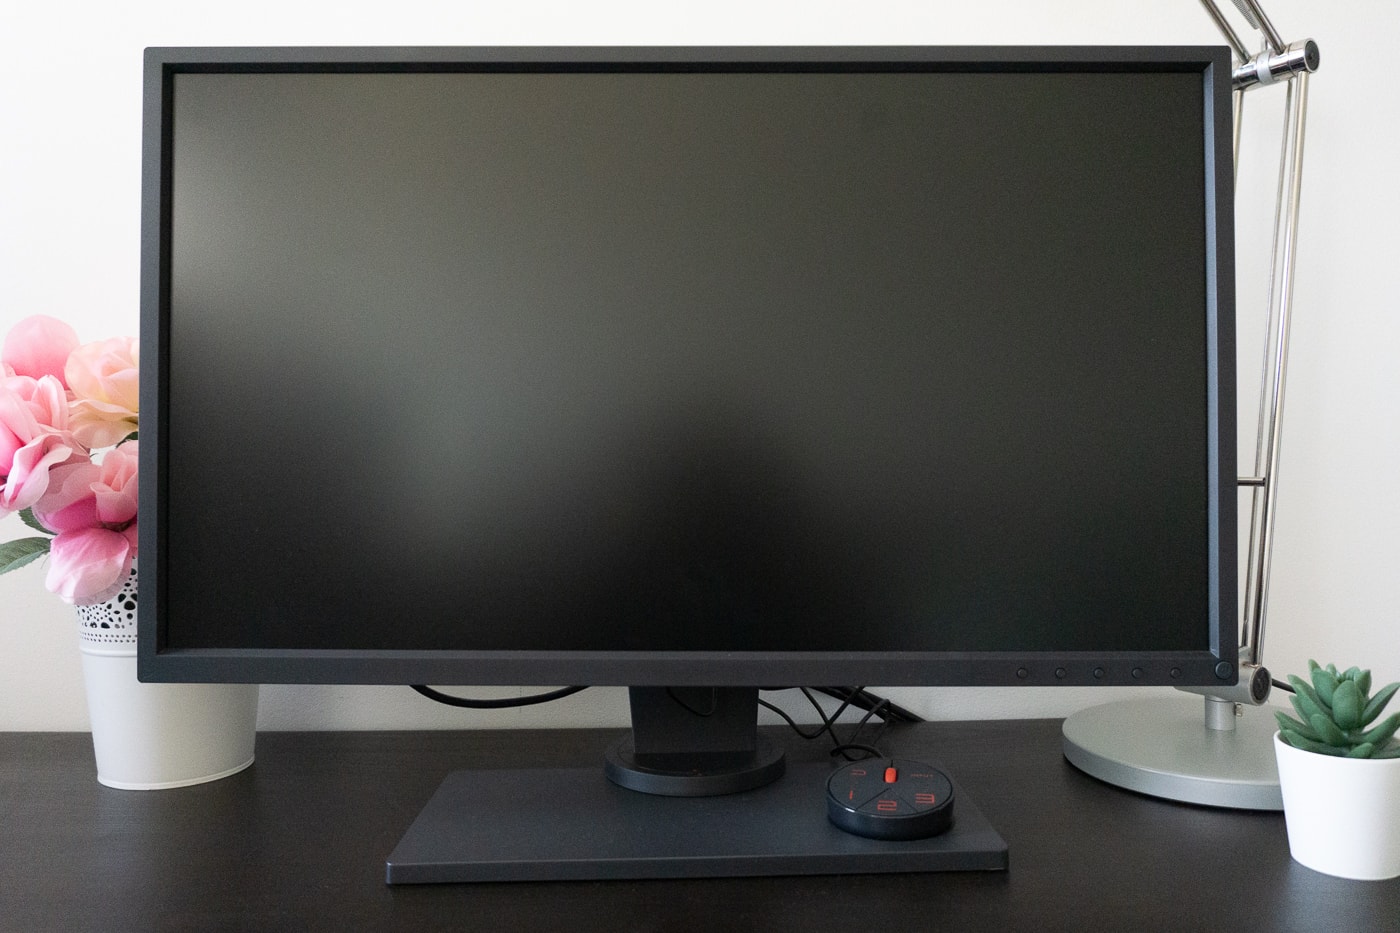 BenQ Zowie XL2546 Gaming Monitor Review